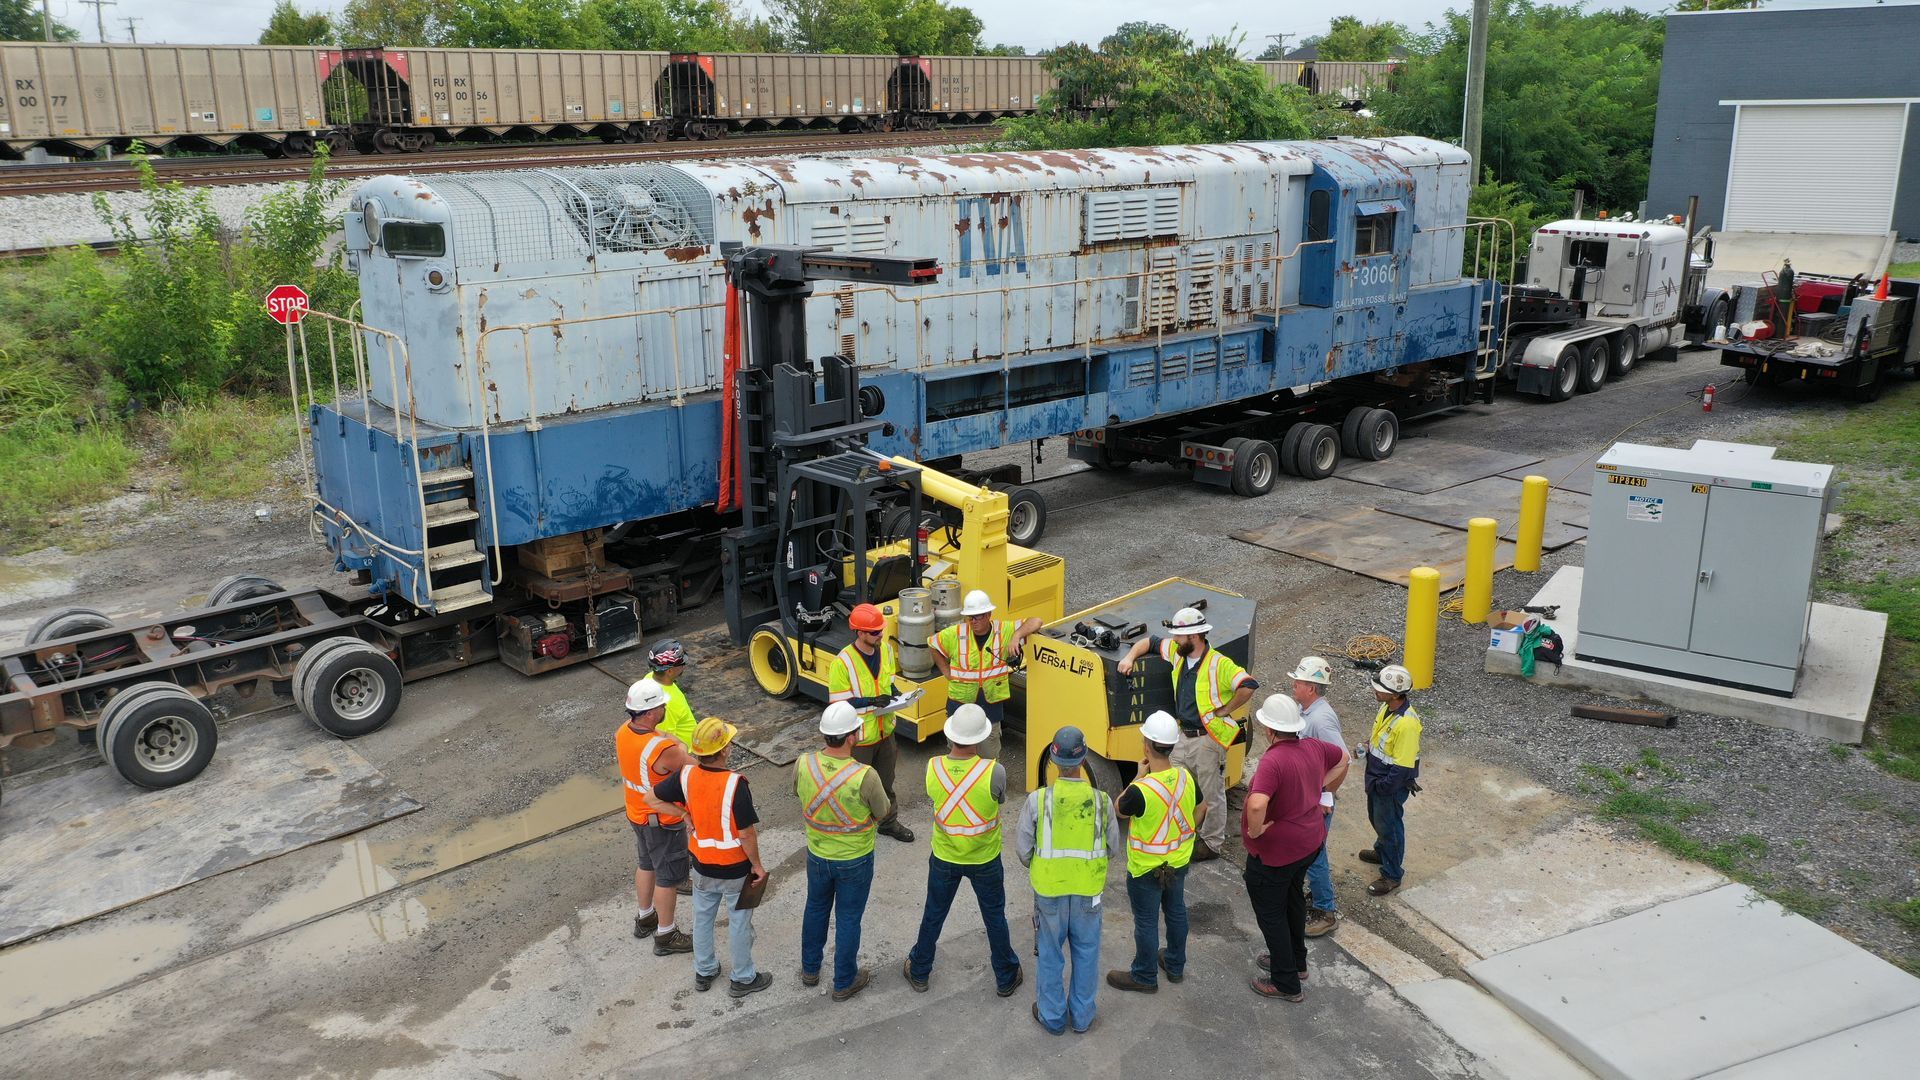 a group of construction workers are standing in front of a train .